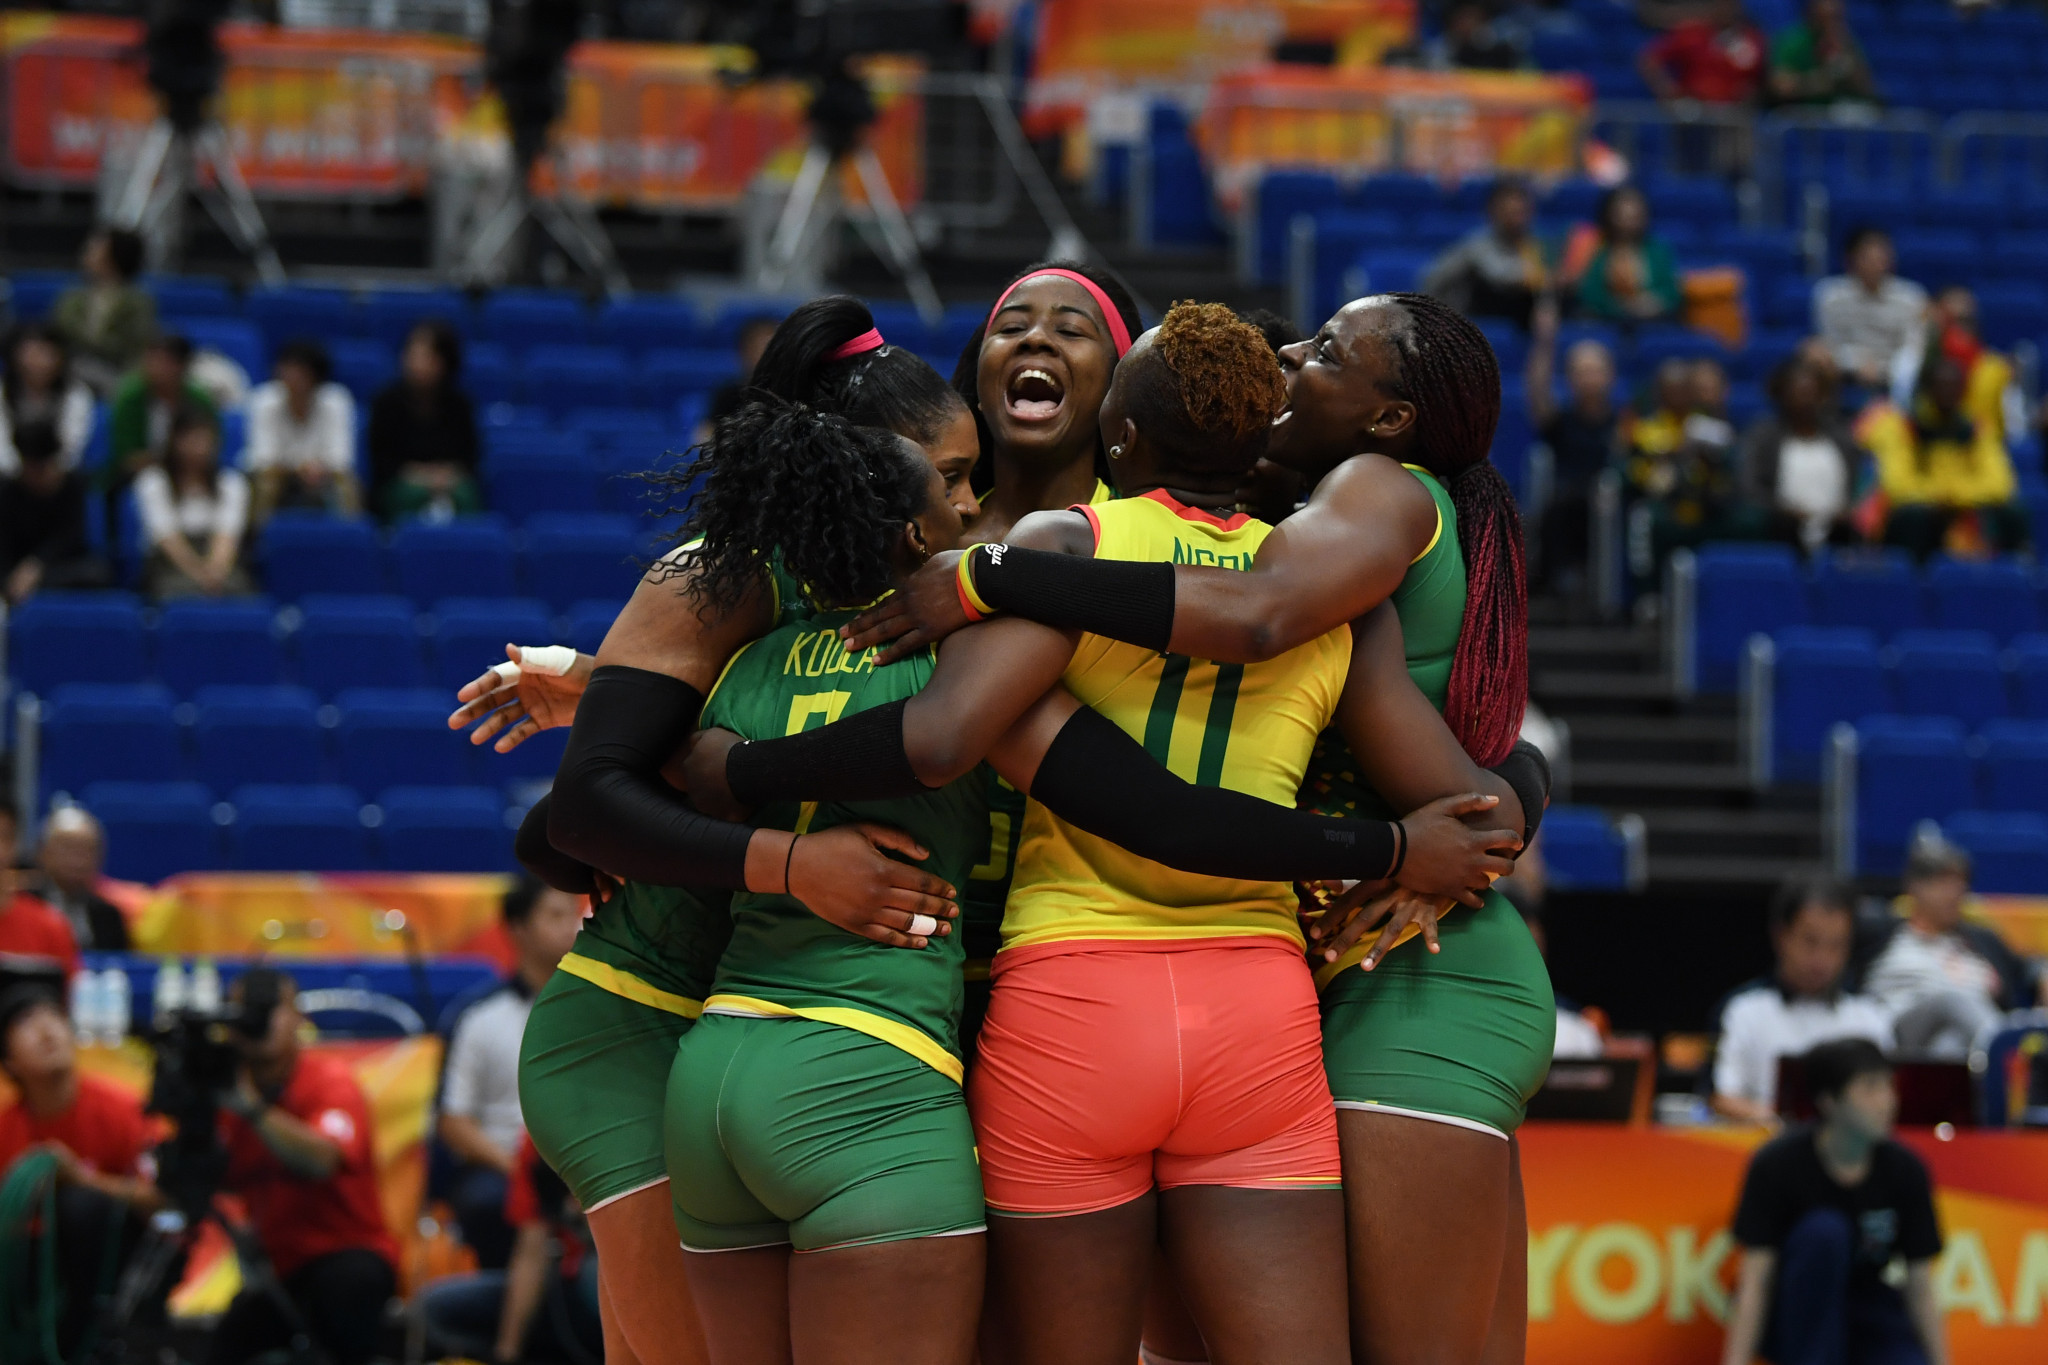 Cameroon won their first ever game at the Women's Volleyball World Championships in Japan, with the FIVB President showing this as an example of volleyball's growth around the world ©Getty Images